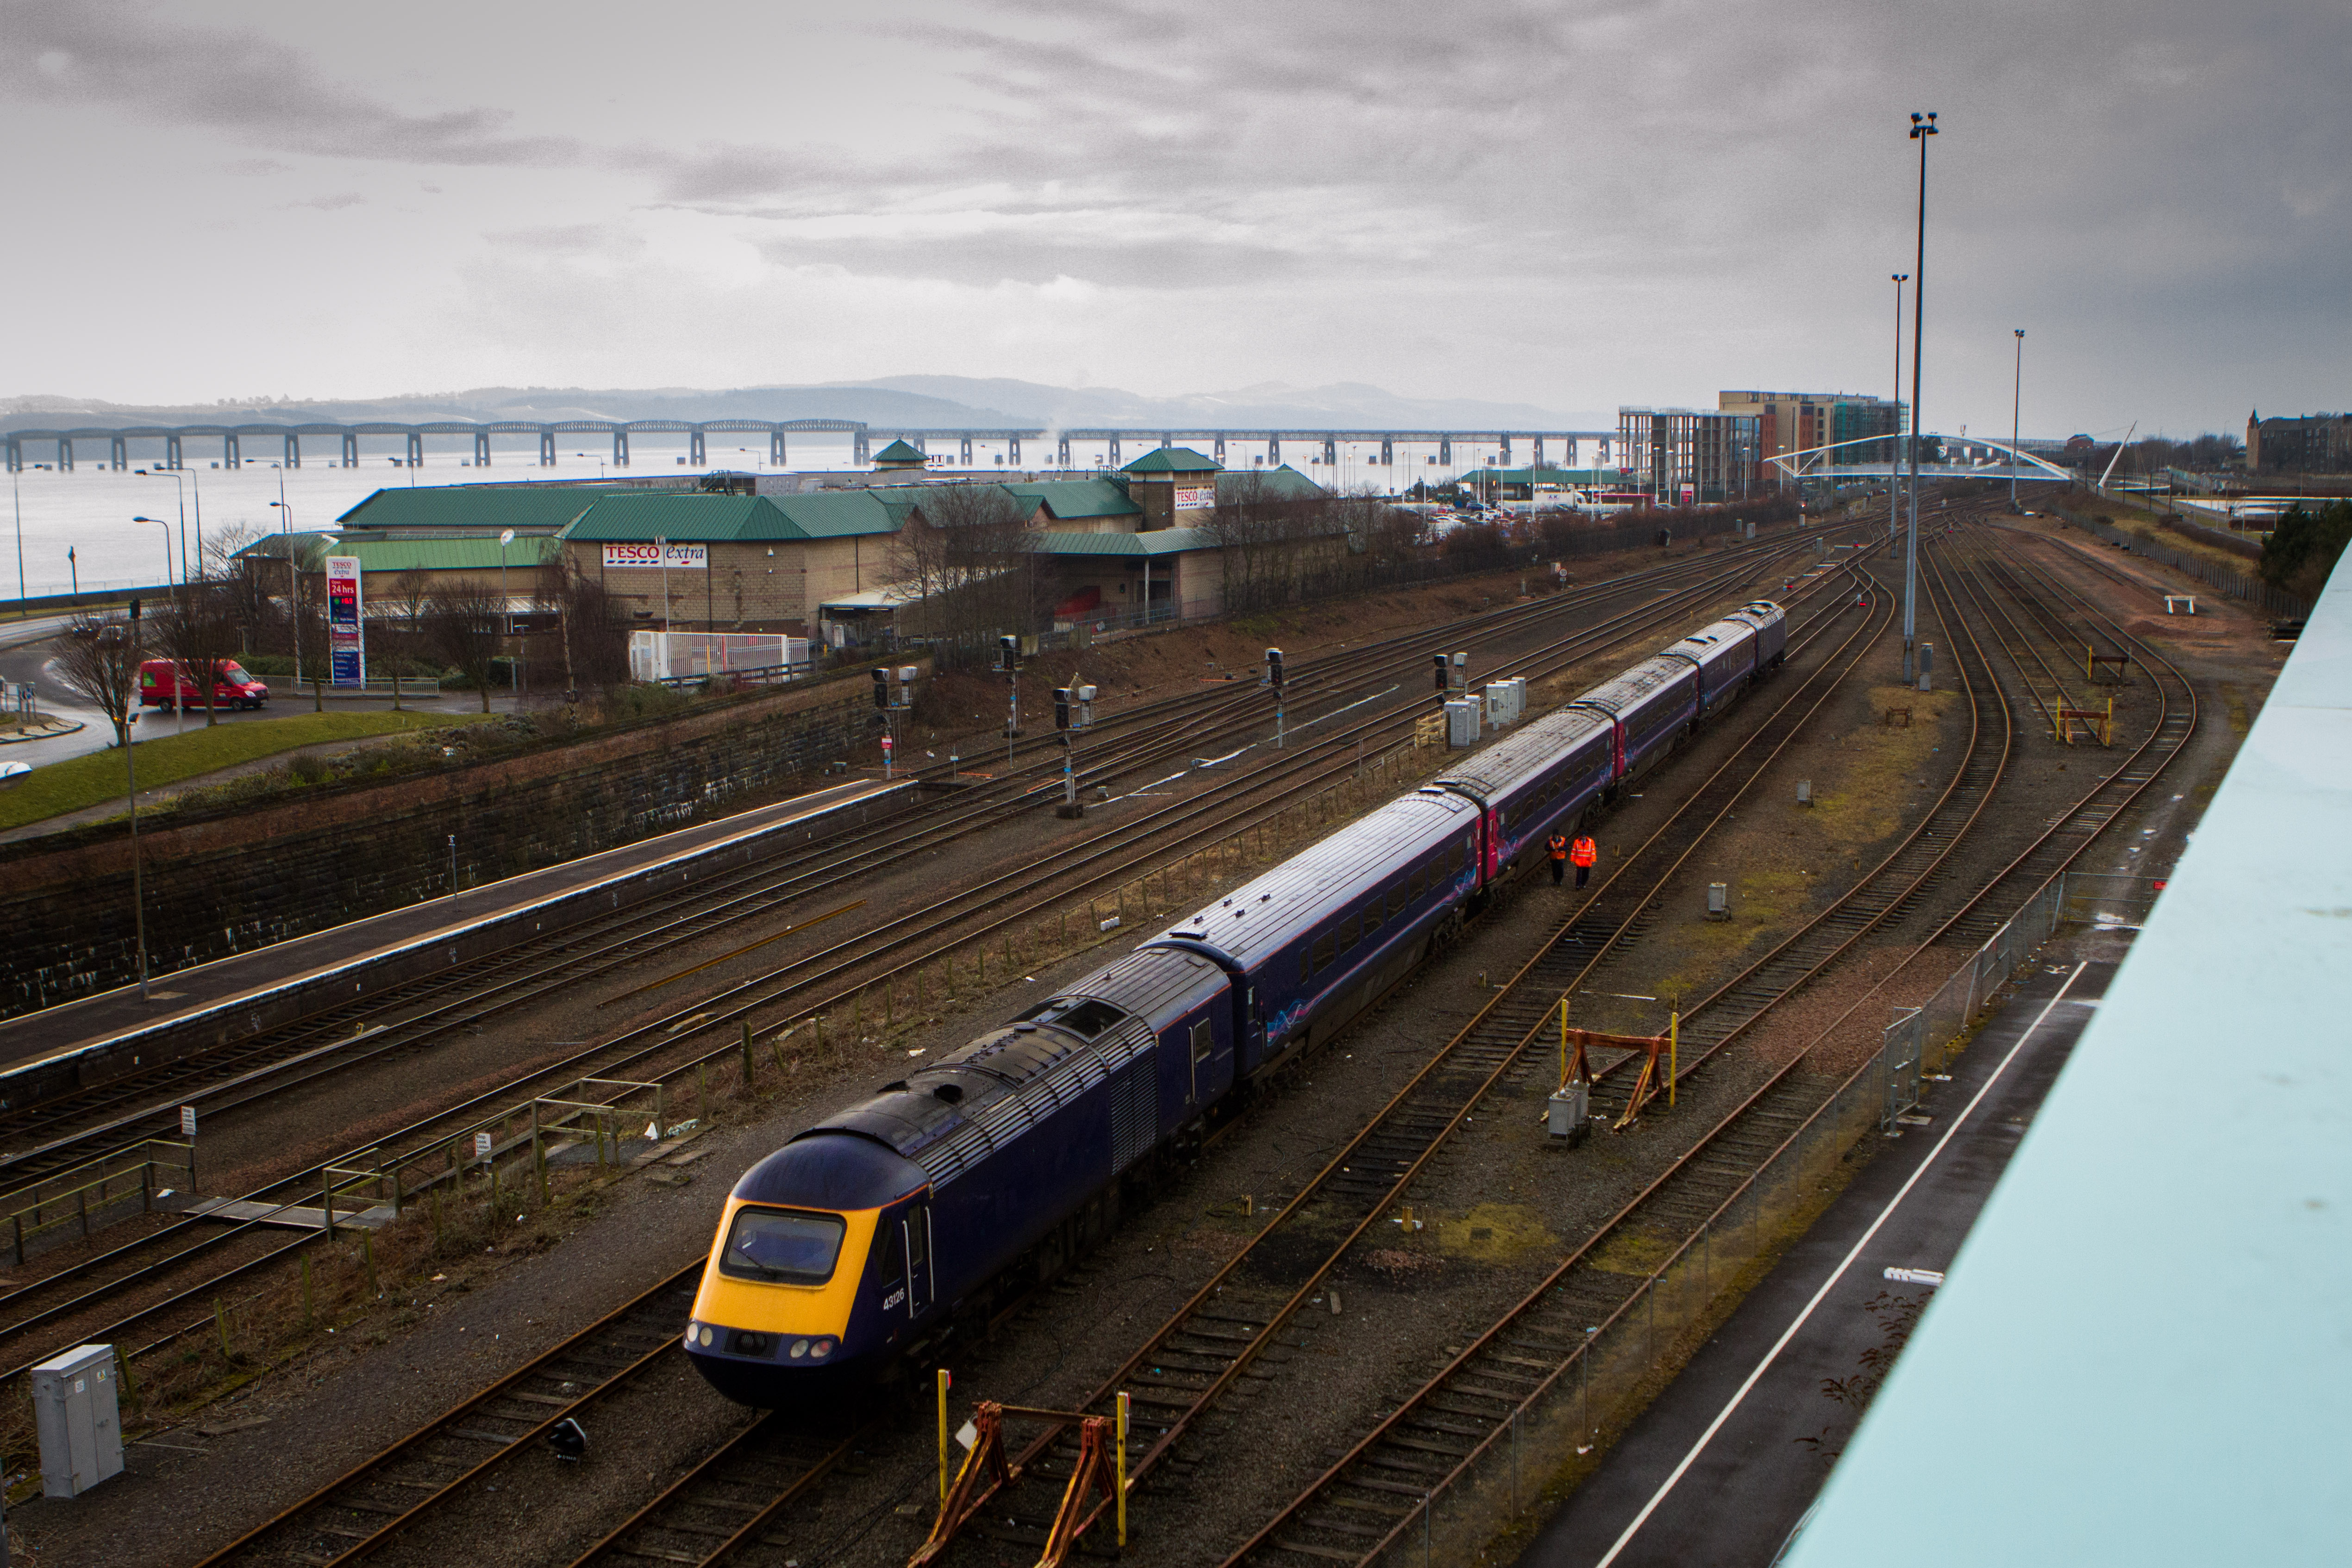 Scottish Conservative MSP for the north-east region Liam Kerr has now challenged the Scottish Government to look again at how it can deliver on its pledge to improve rail connectivity.